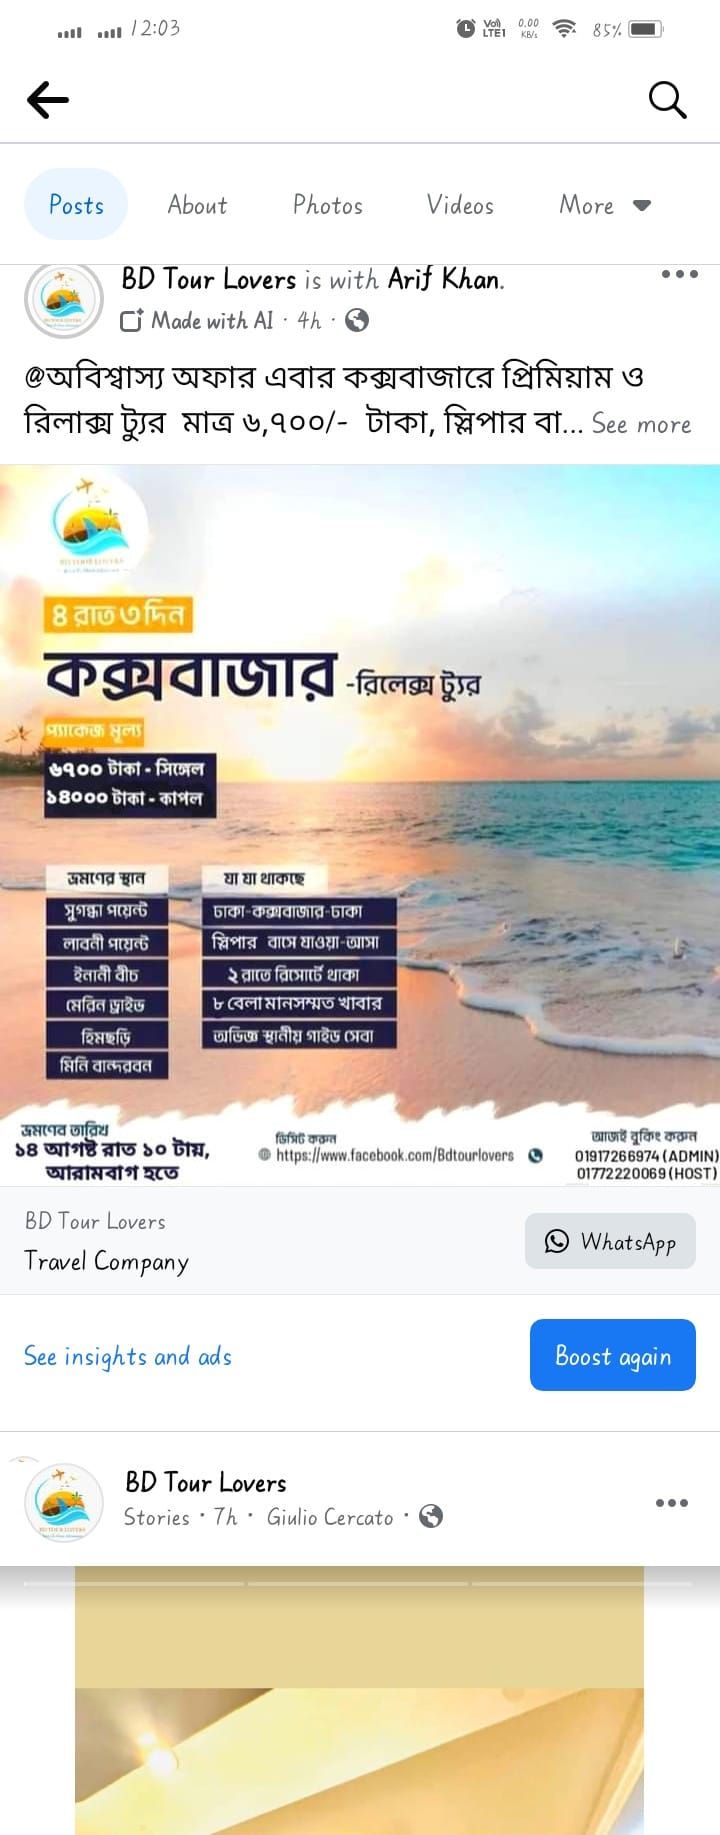 Relax & Rejuvenate - A 40% Discounted 3-Day Trip to Cox's Bazar